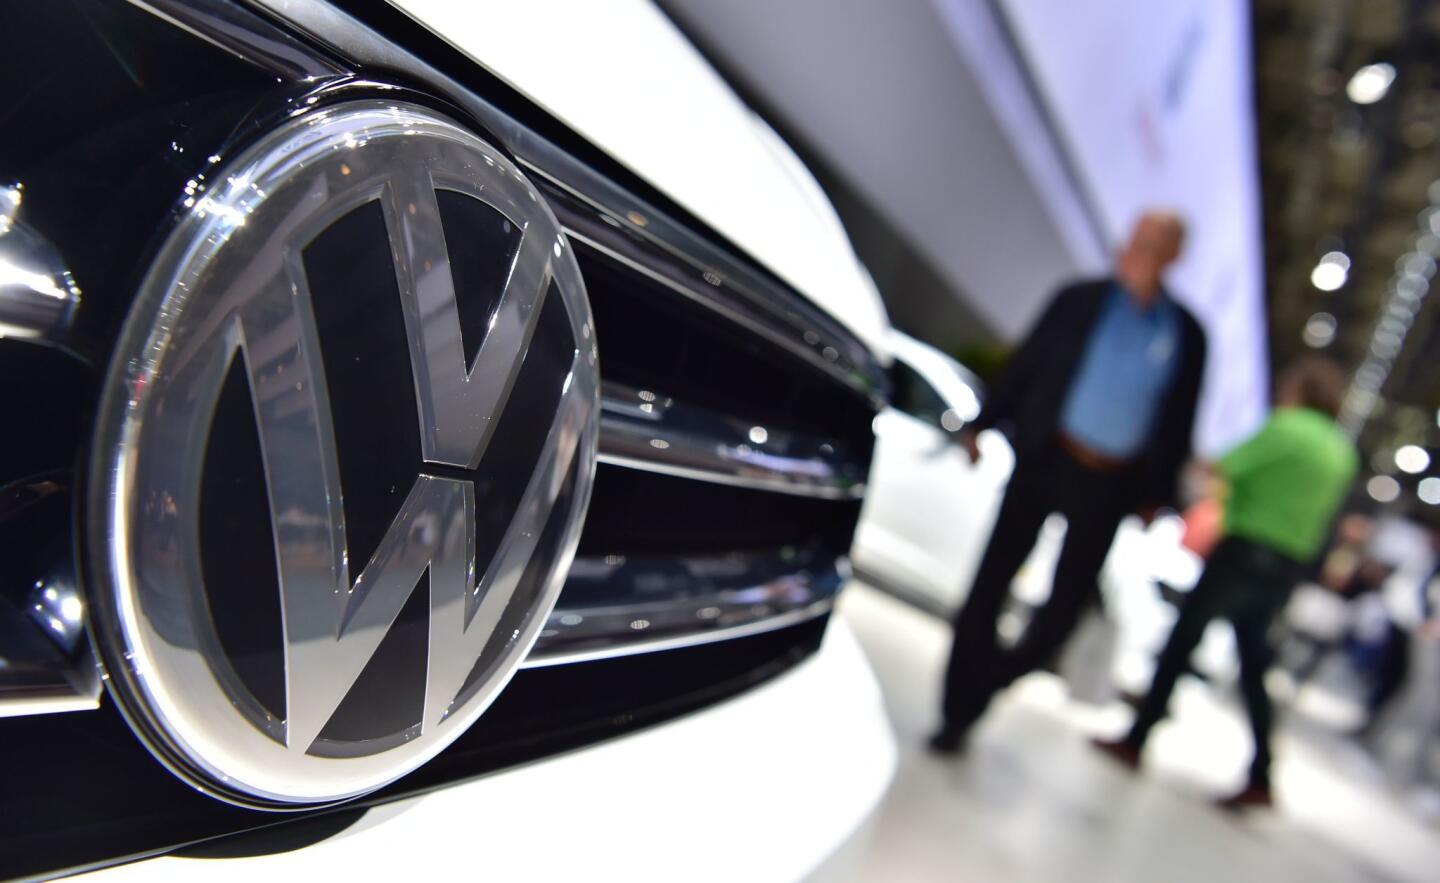 Volkswagen: $15.3 billion Automaker Volkswagen will pay up to $15.3 billion for rigging diesel emissions tests to make it appear its cars met U.S. standards. It's the largest fine ever in the auto industry.